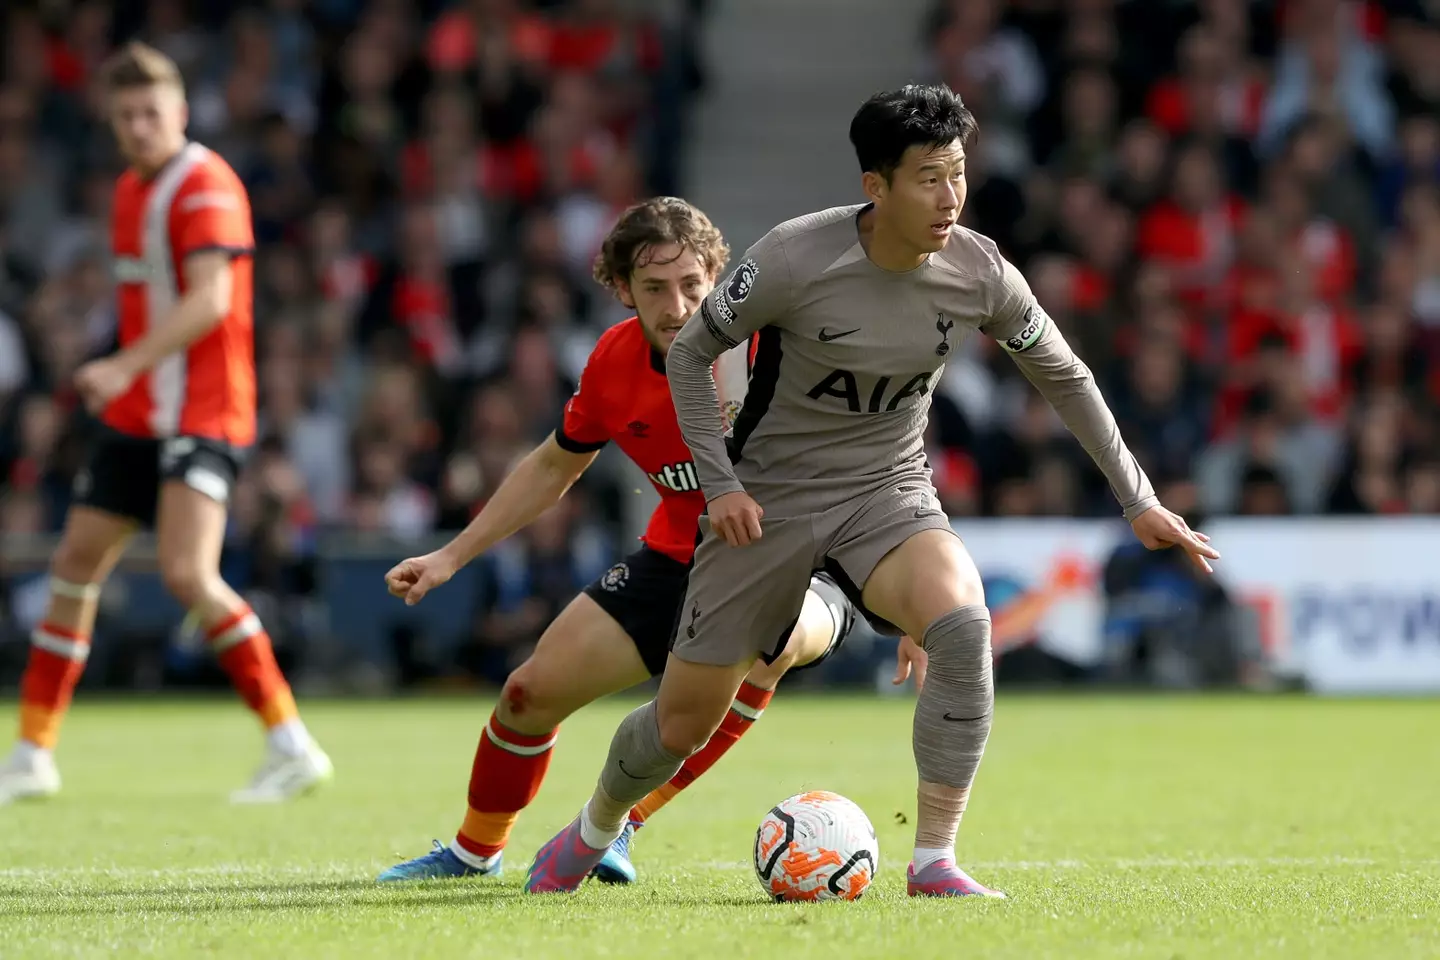 Son Heung-Min may not have scored on Saturday, but he played his part in Spurs' important win against Luton. (